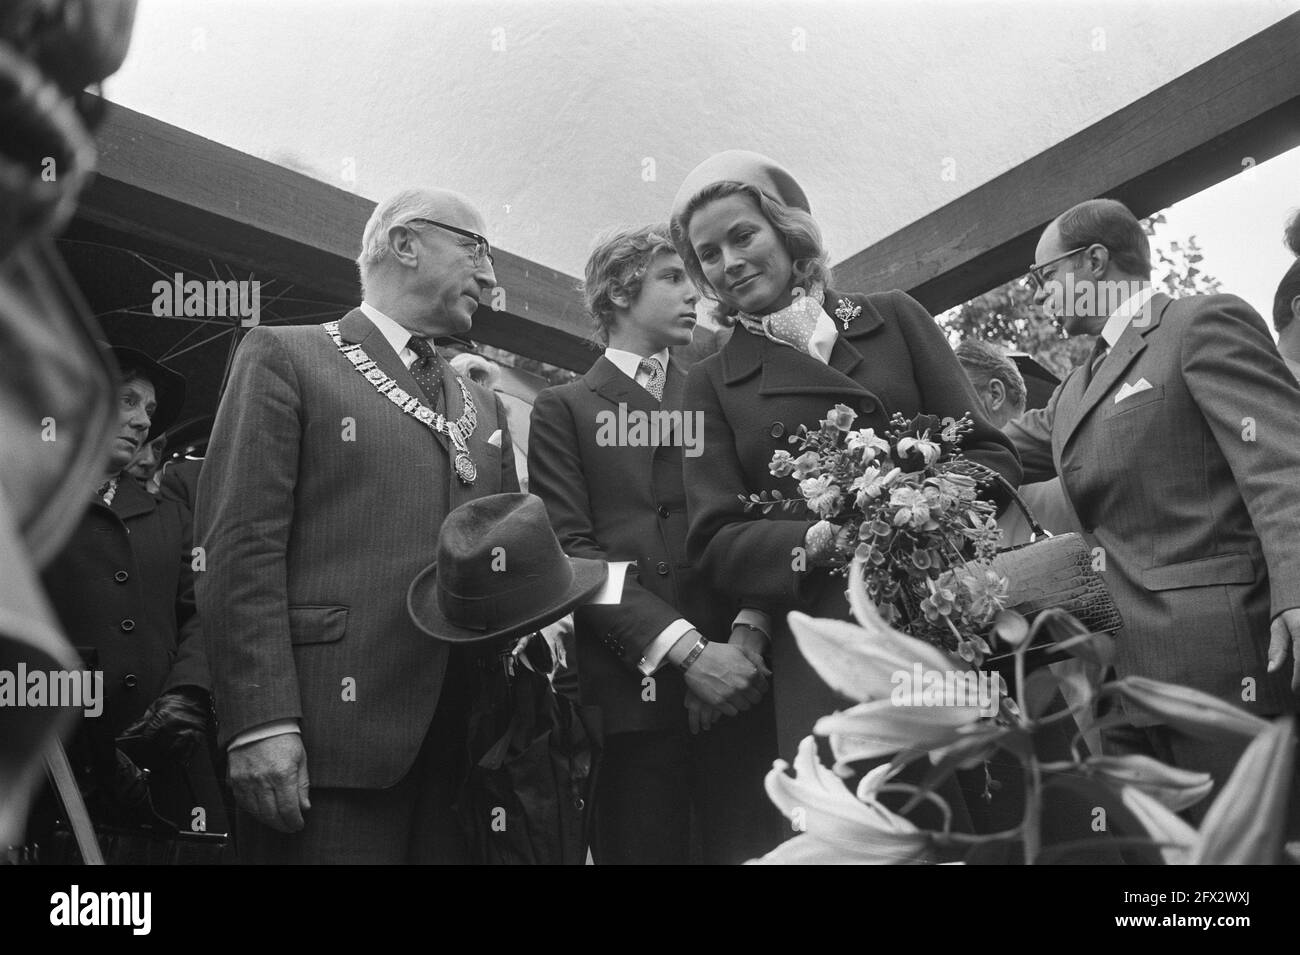 Princess Gracia of Monaco baptizes a lily at Floriade, September 16, 1972, lilies, princesses, The Netherlands, 20th century press agency photo, news to remember, documentary, historic photography 1945-1990, visual stories, human history of the Twentieth Century, capturing moments in time Stock Photo